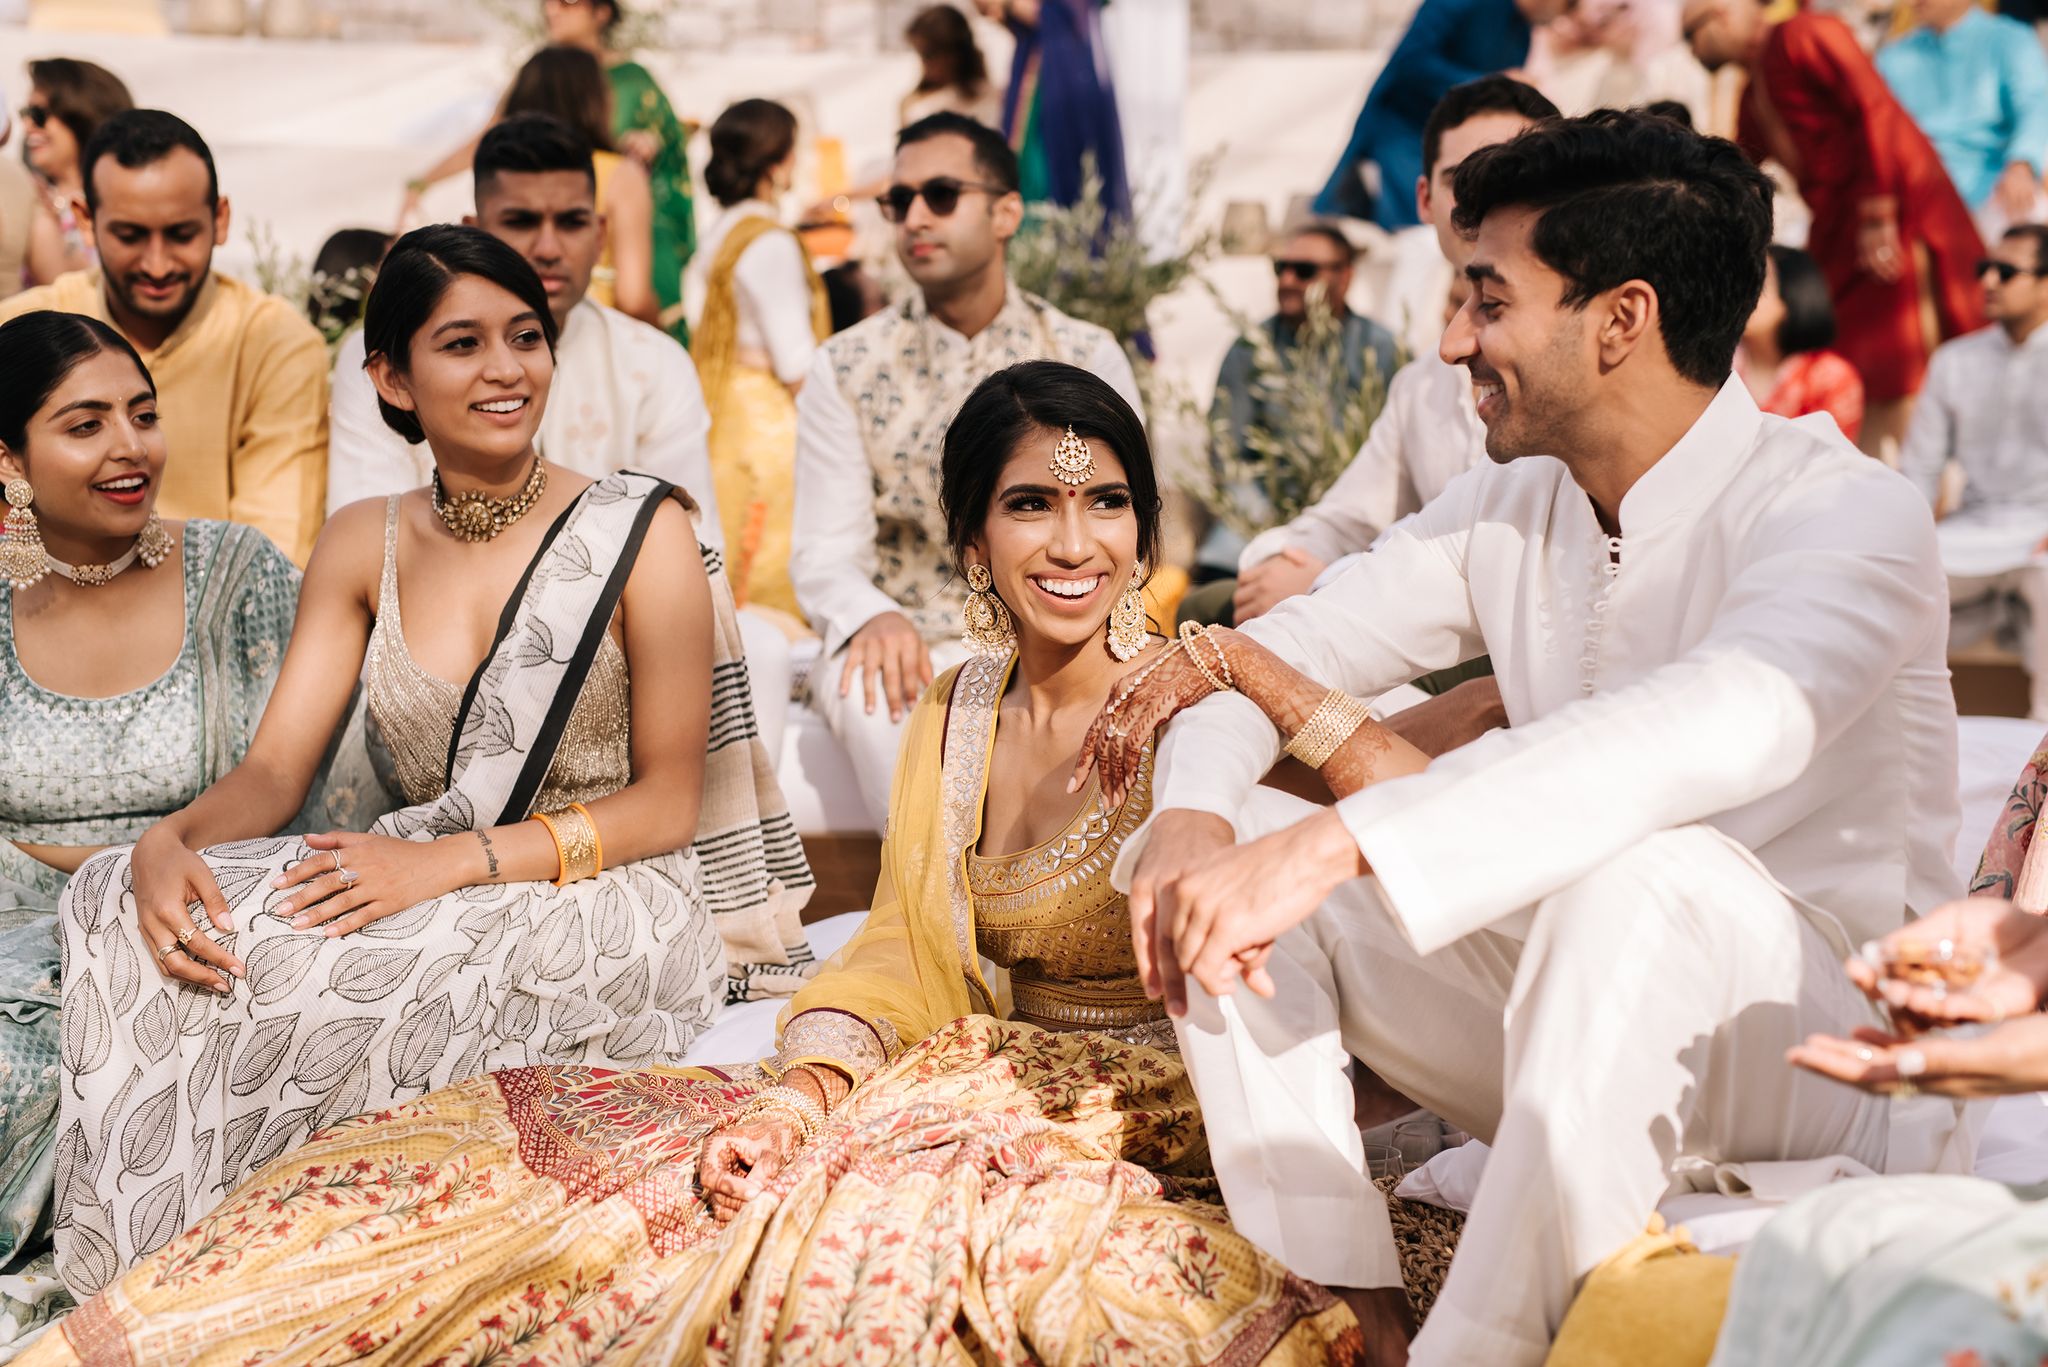 An Indian Wedding by the Sea on the Athens Riviera